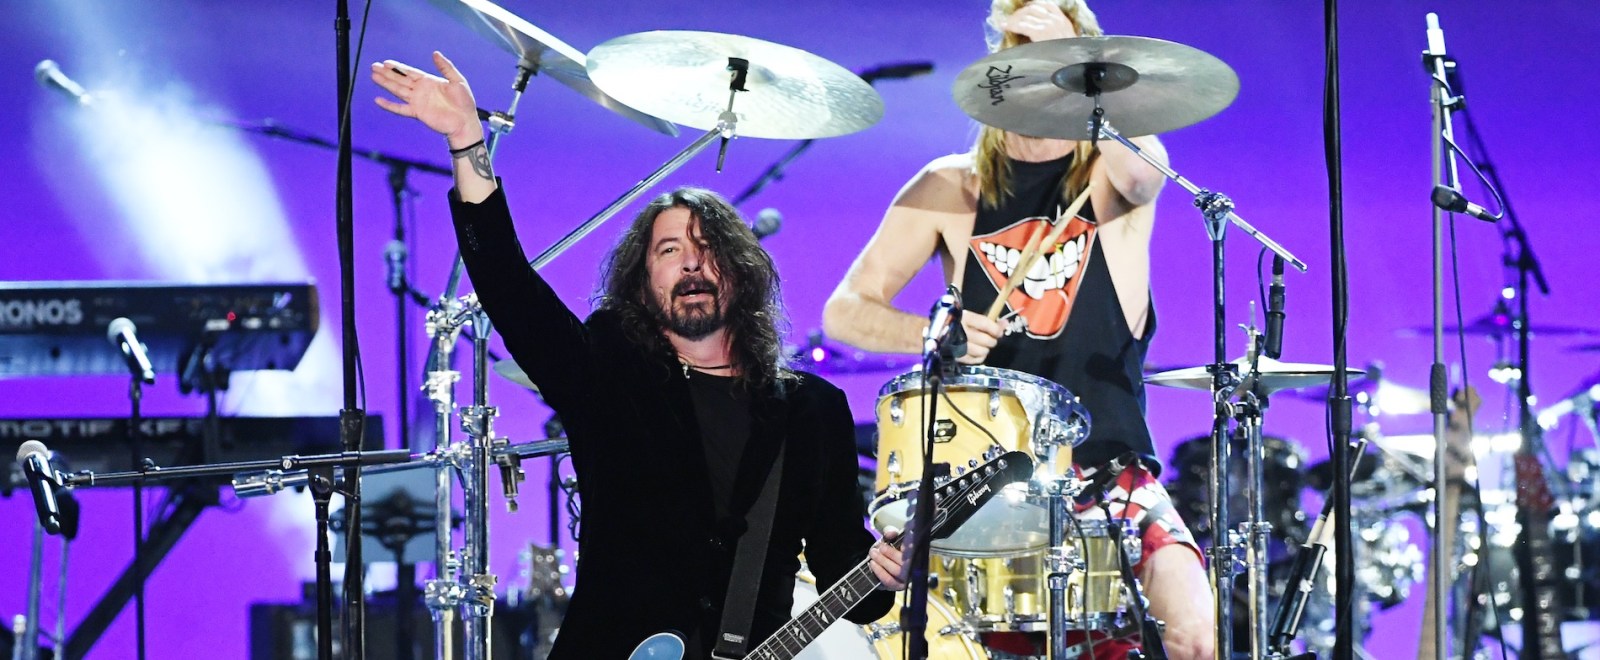 dave-grohl-foo-fighters-prince-getty-full.jpg